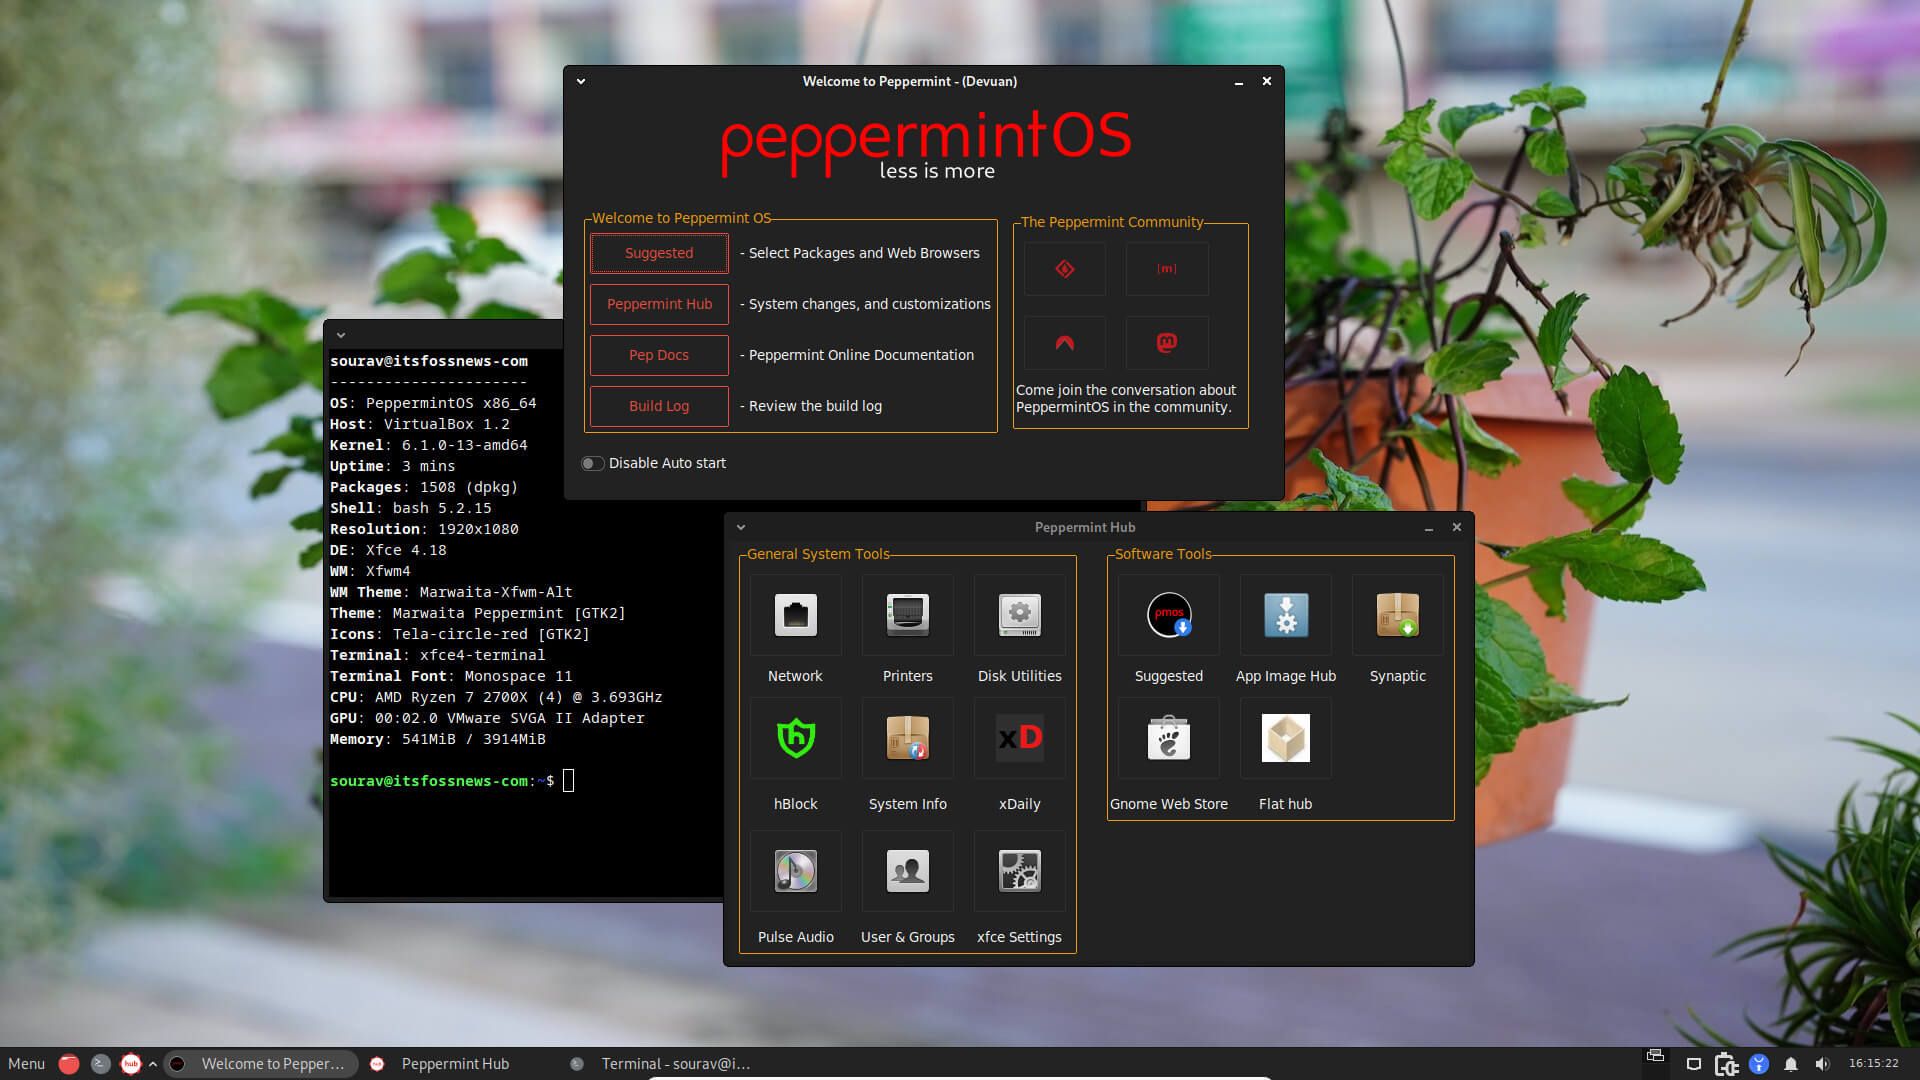 a screenshot of the peppermint desktop with the system info, welcome peppermint app, and peppermint hub being displayed